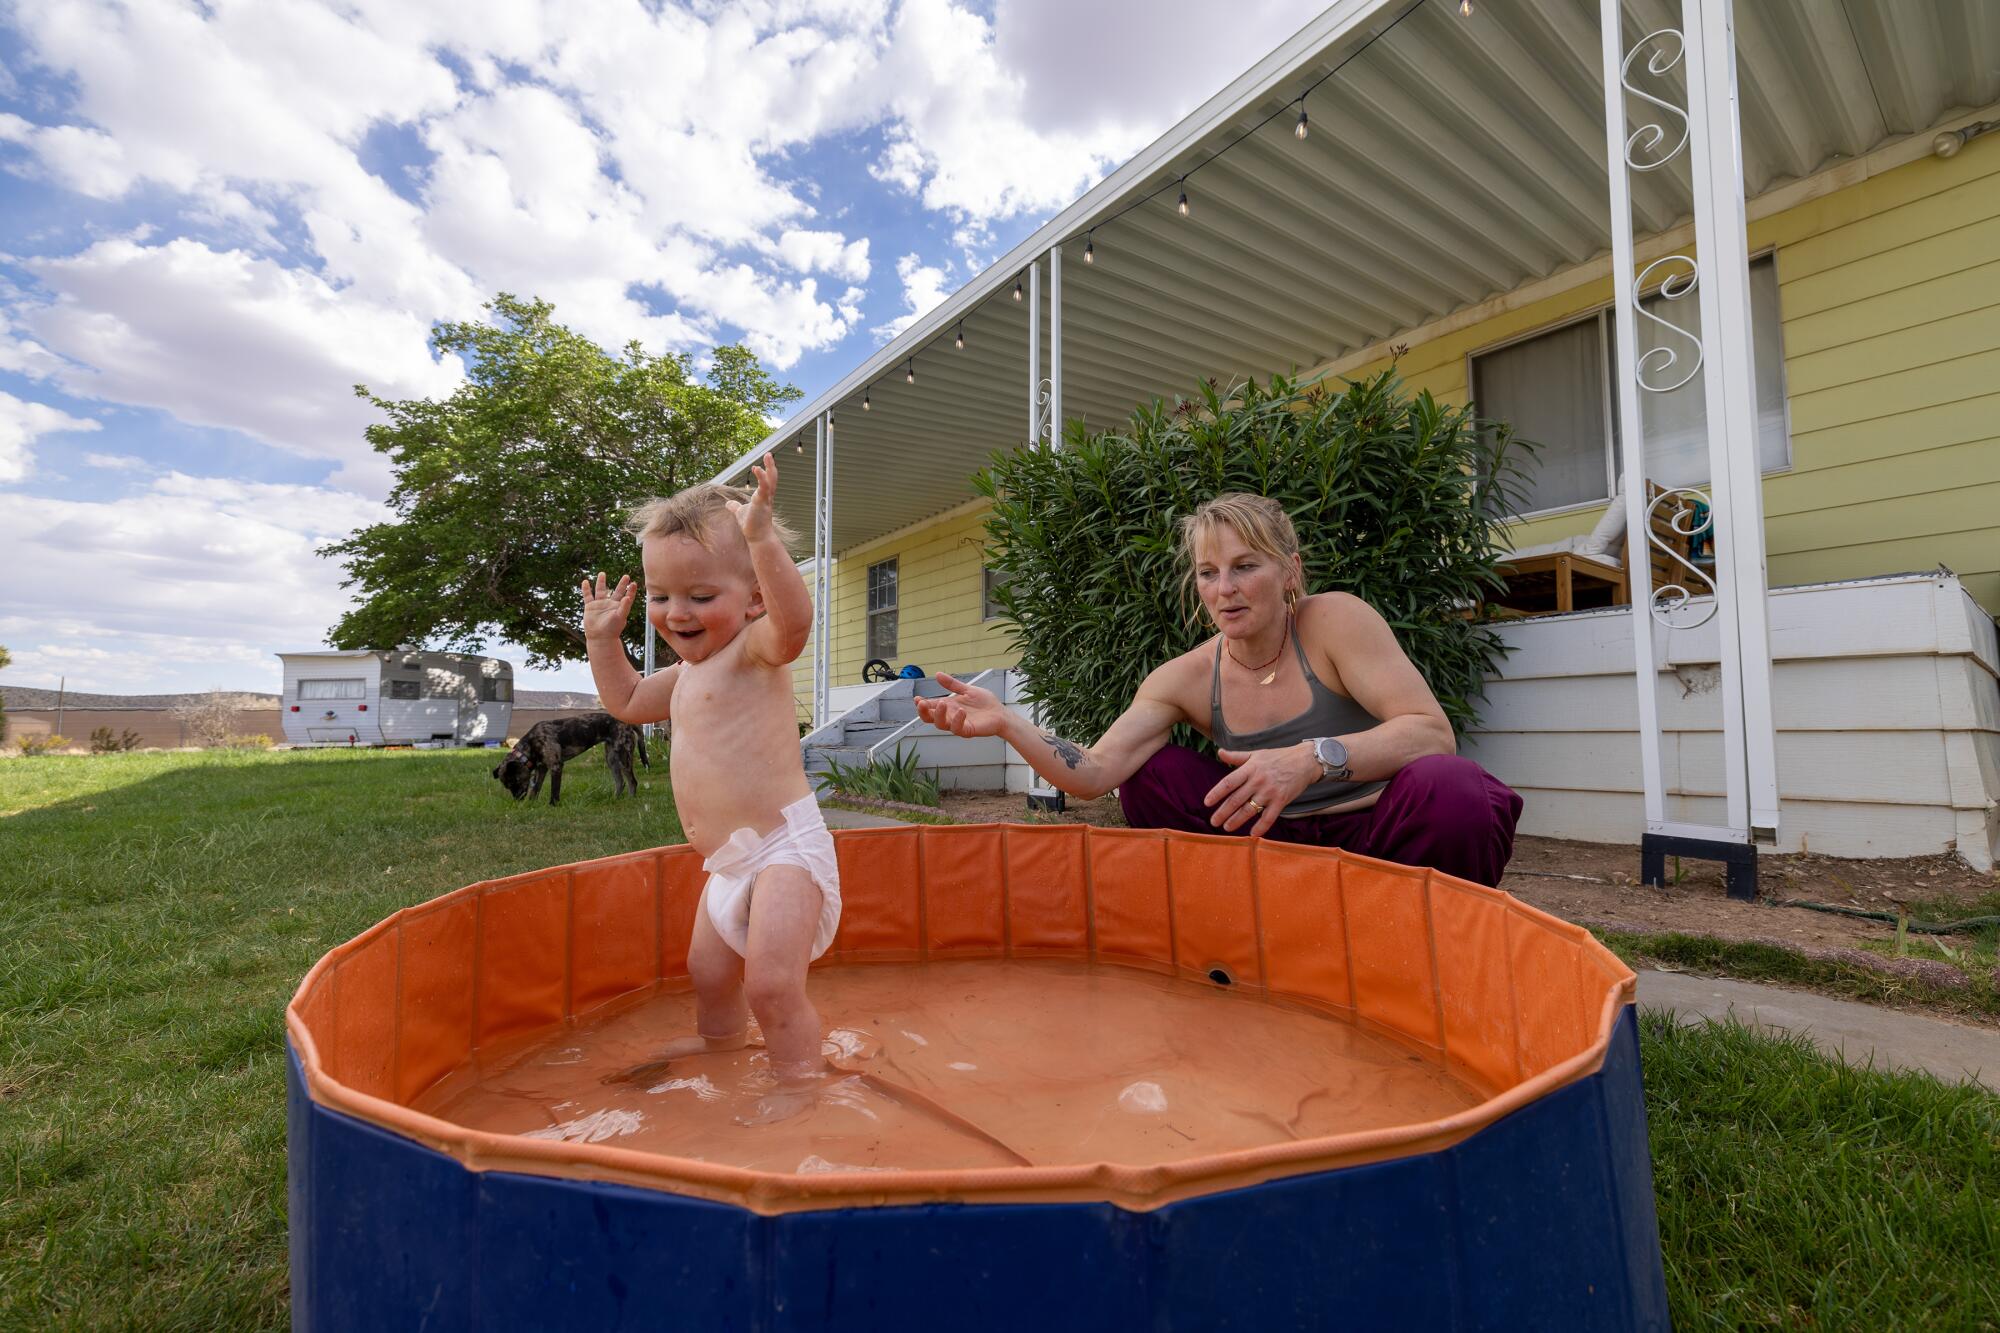 A toddler splashes in an outdoor baby pool while his mother looks on.  